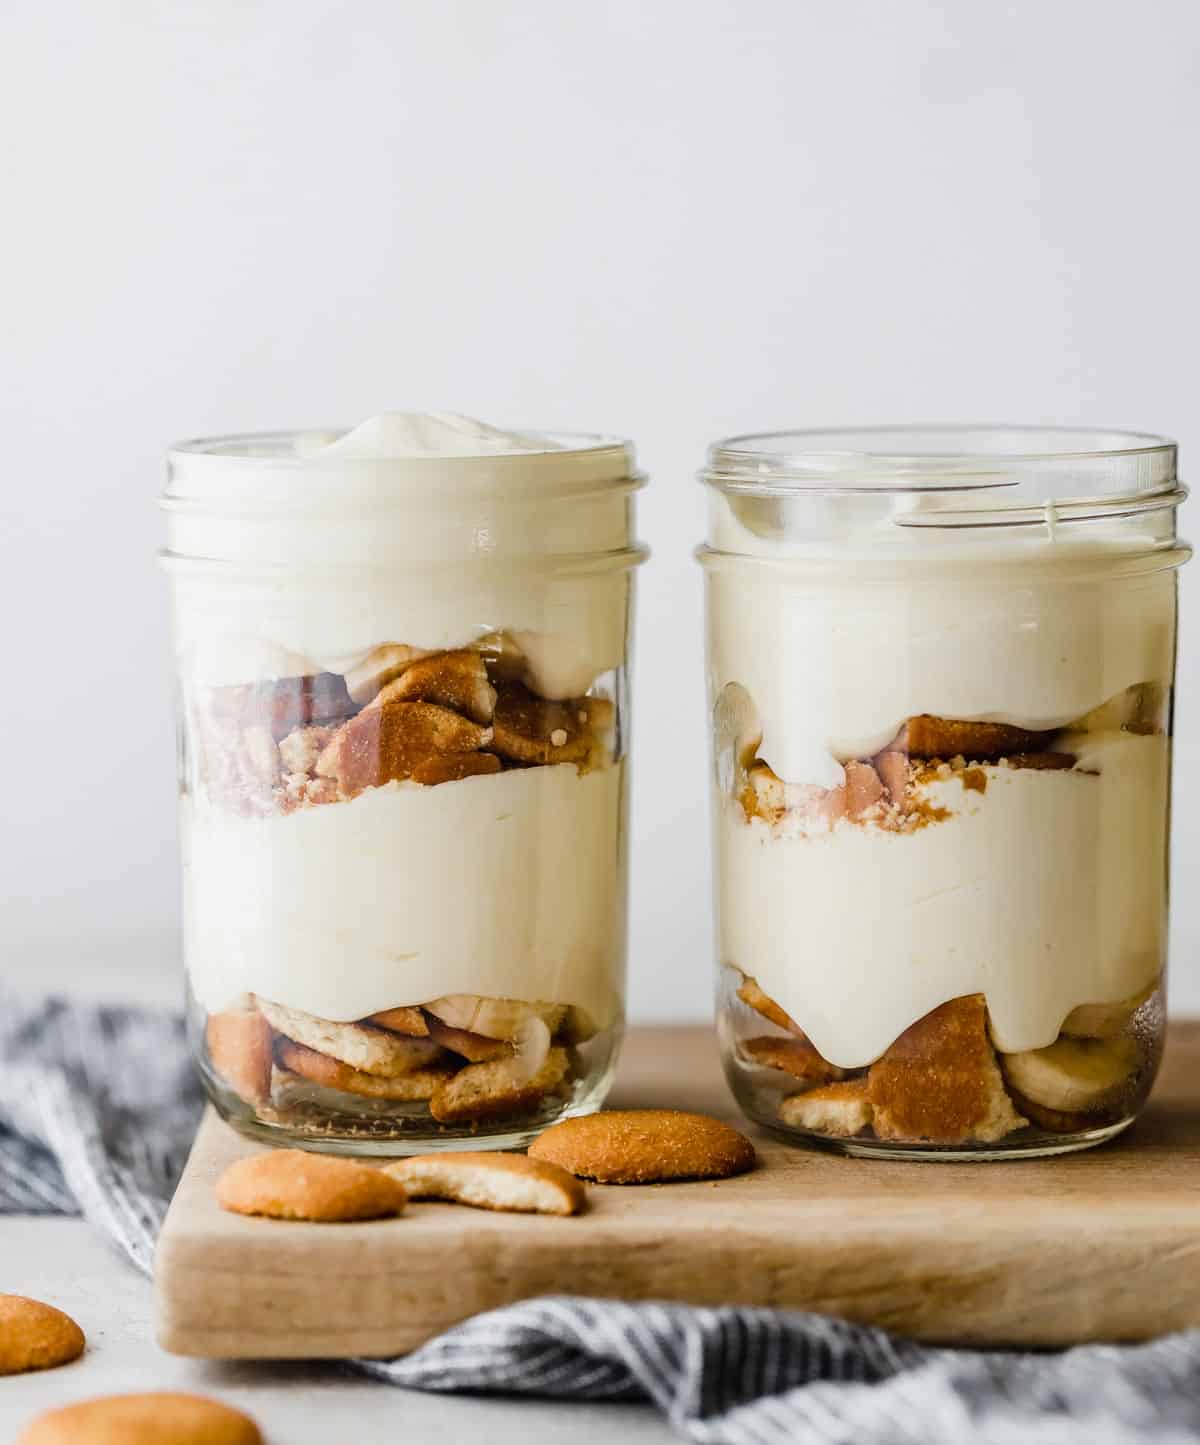 Magnolia Bakery Banana Pudding in a jar against a white background.